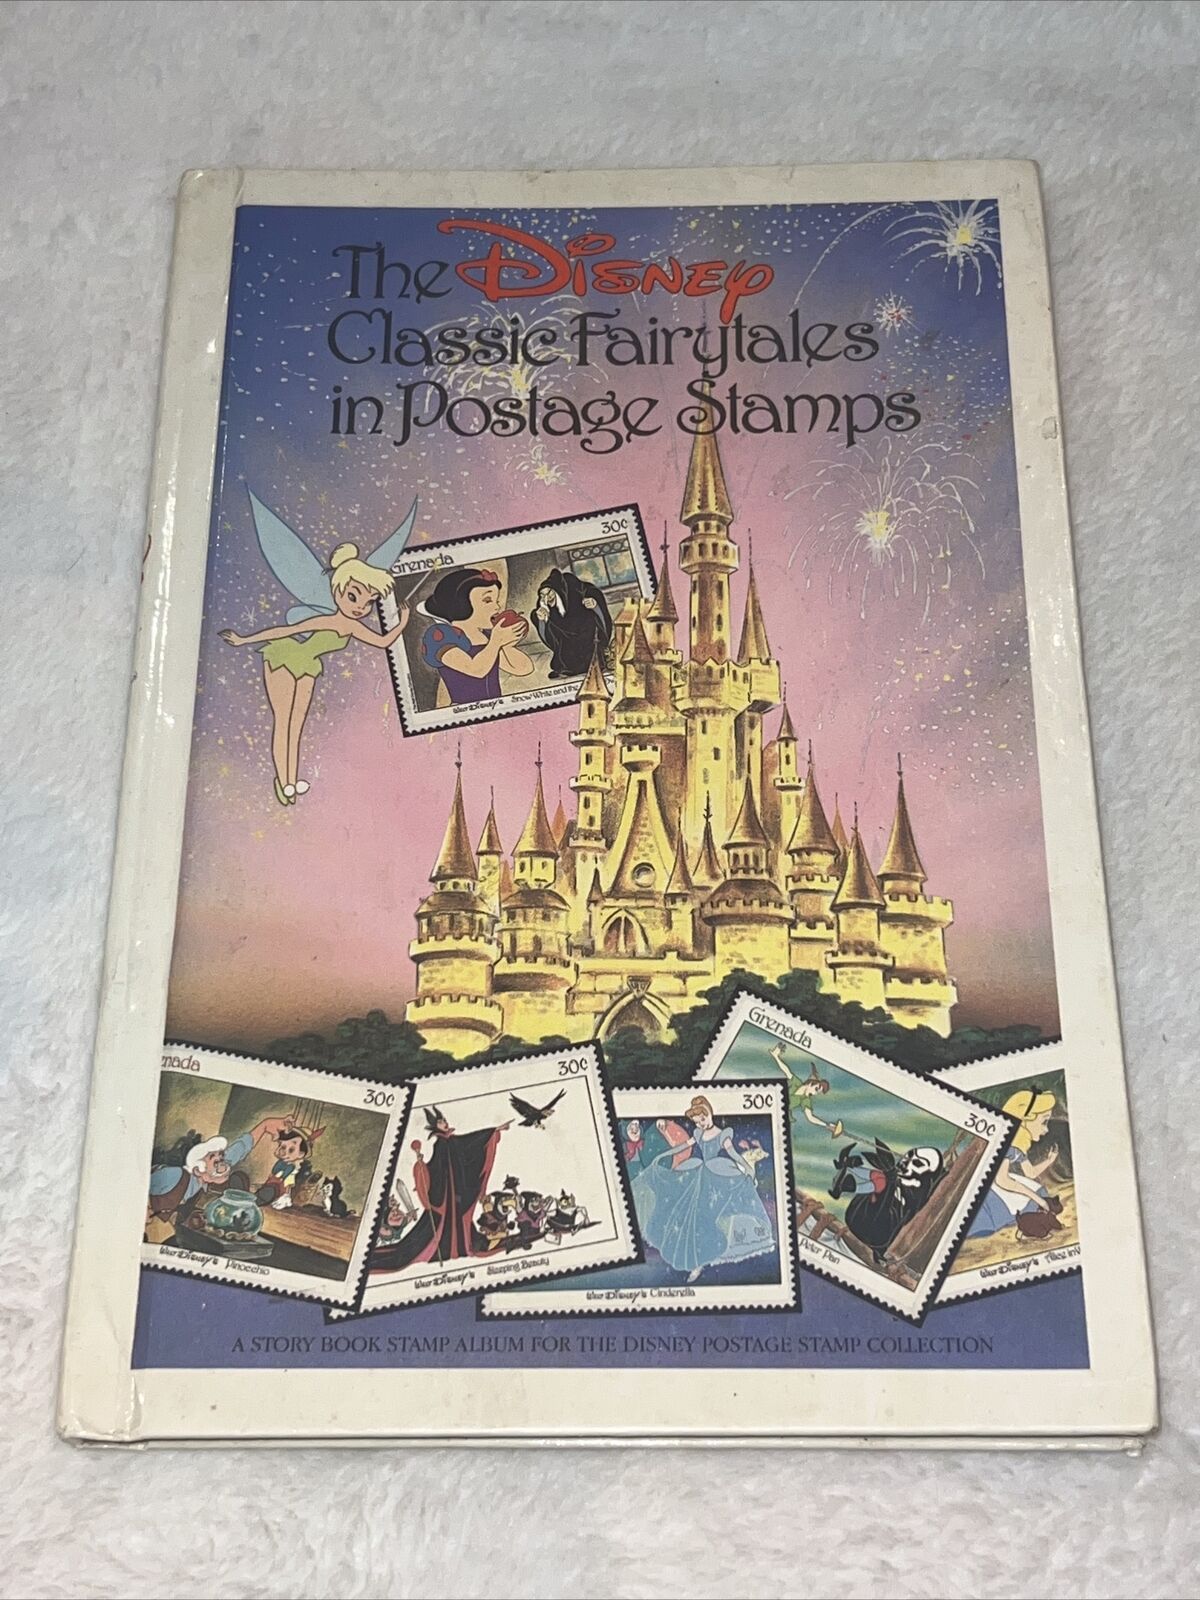 vintage The Disney Classic Fairytales in Postage Stamps album for collecting FD2